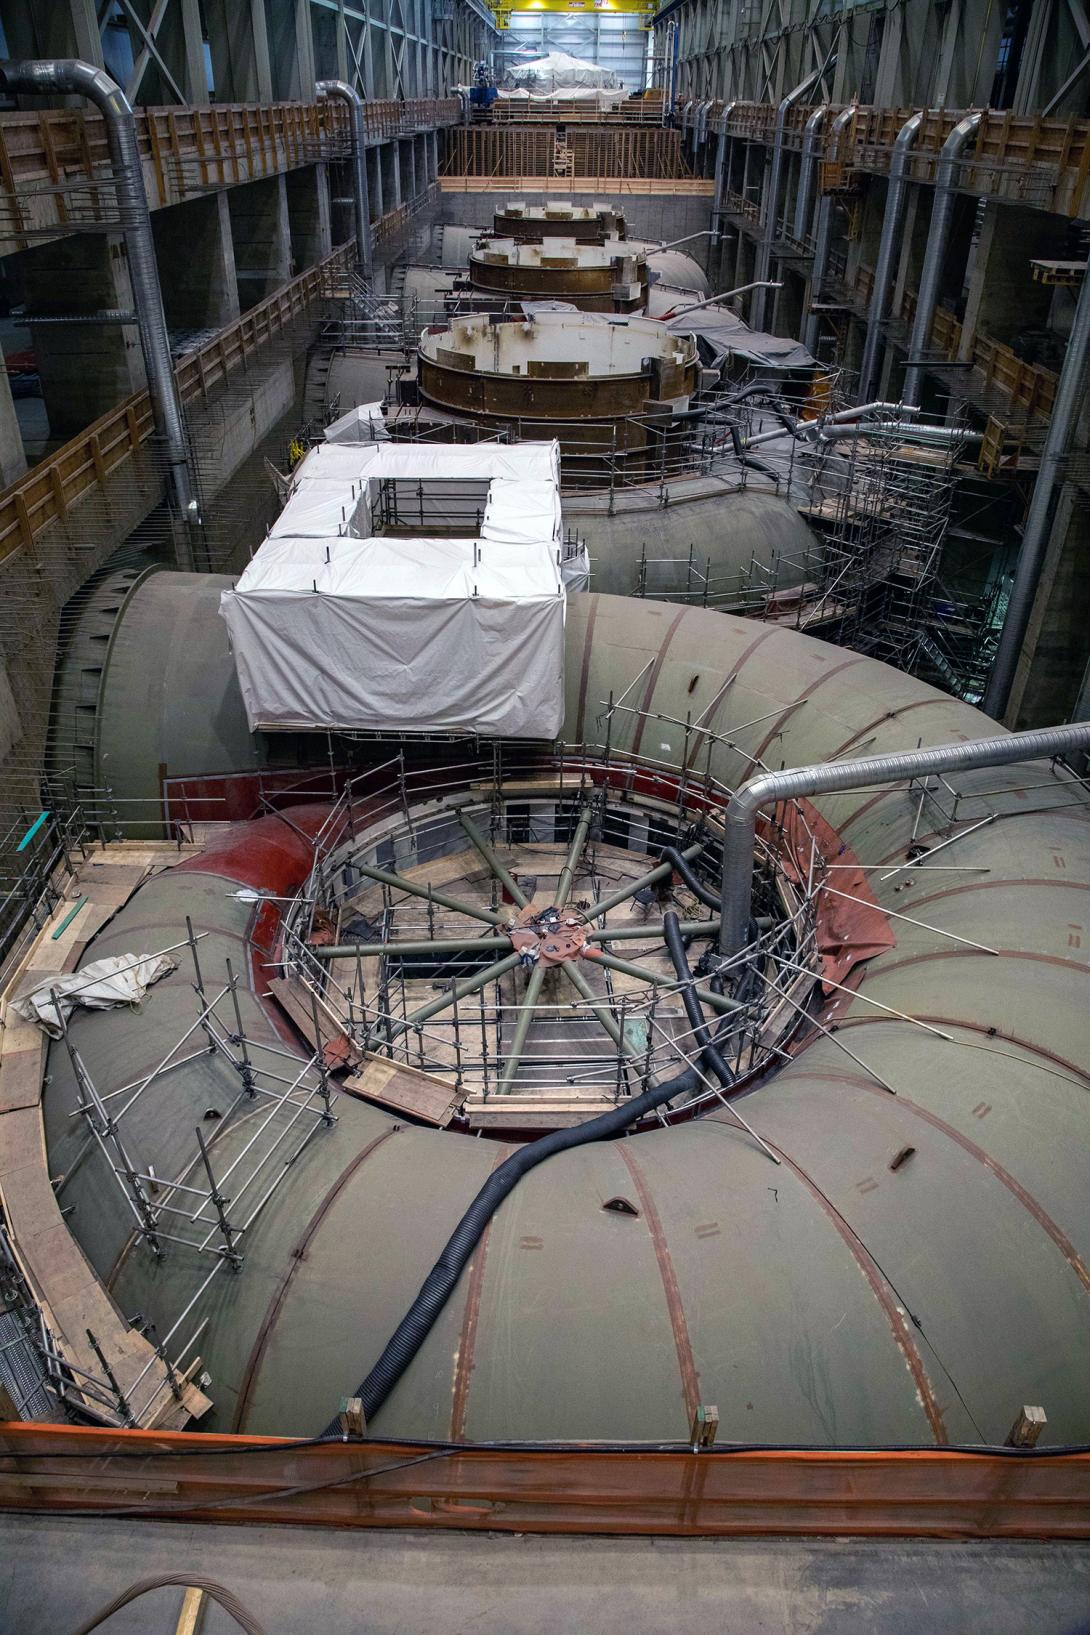 Spiral case units 6 to 1 in varying stages of construction inside the powerhouse. Spiral case units 4 and 3 are ready to be encased in concrete. | June 2022